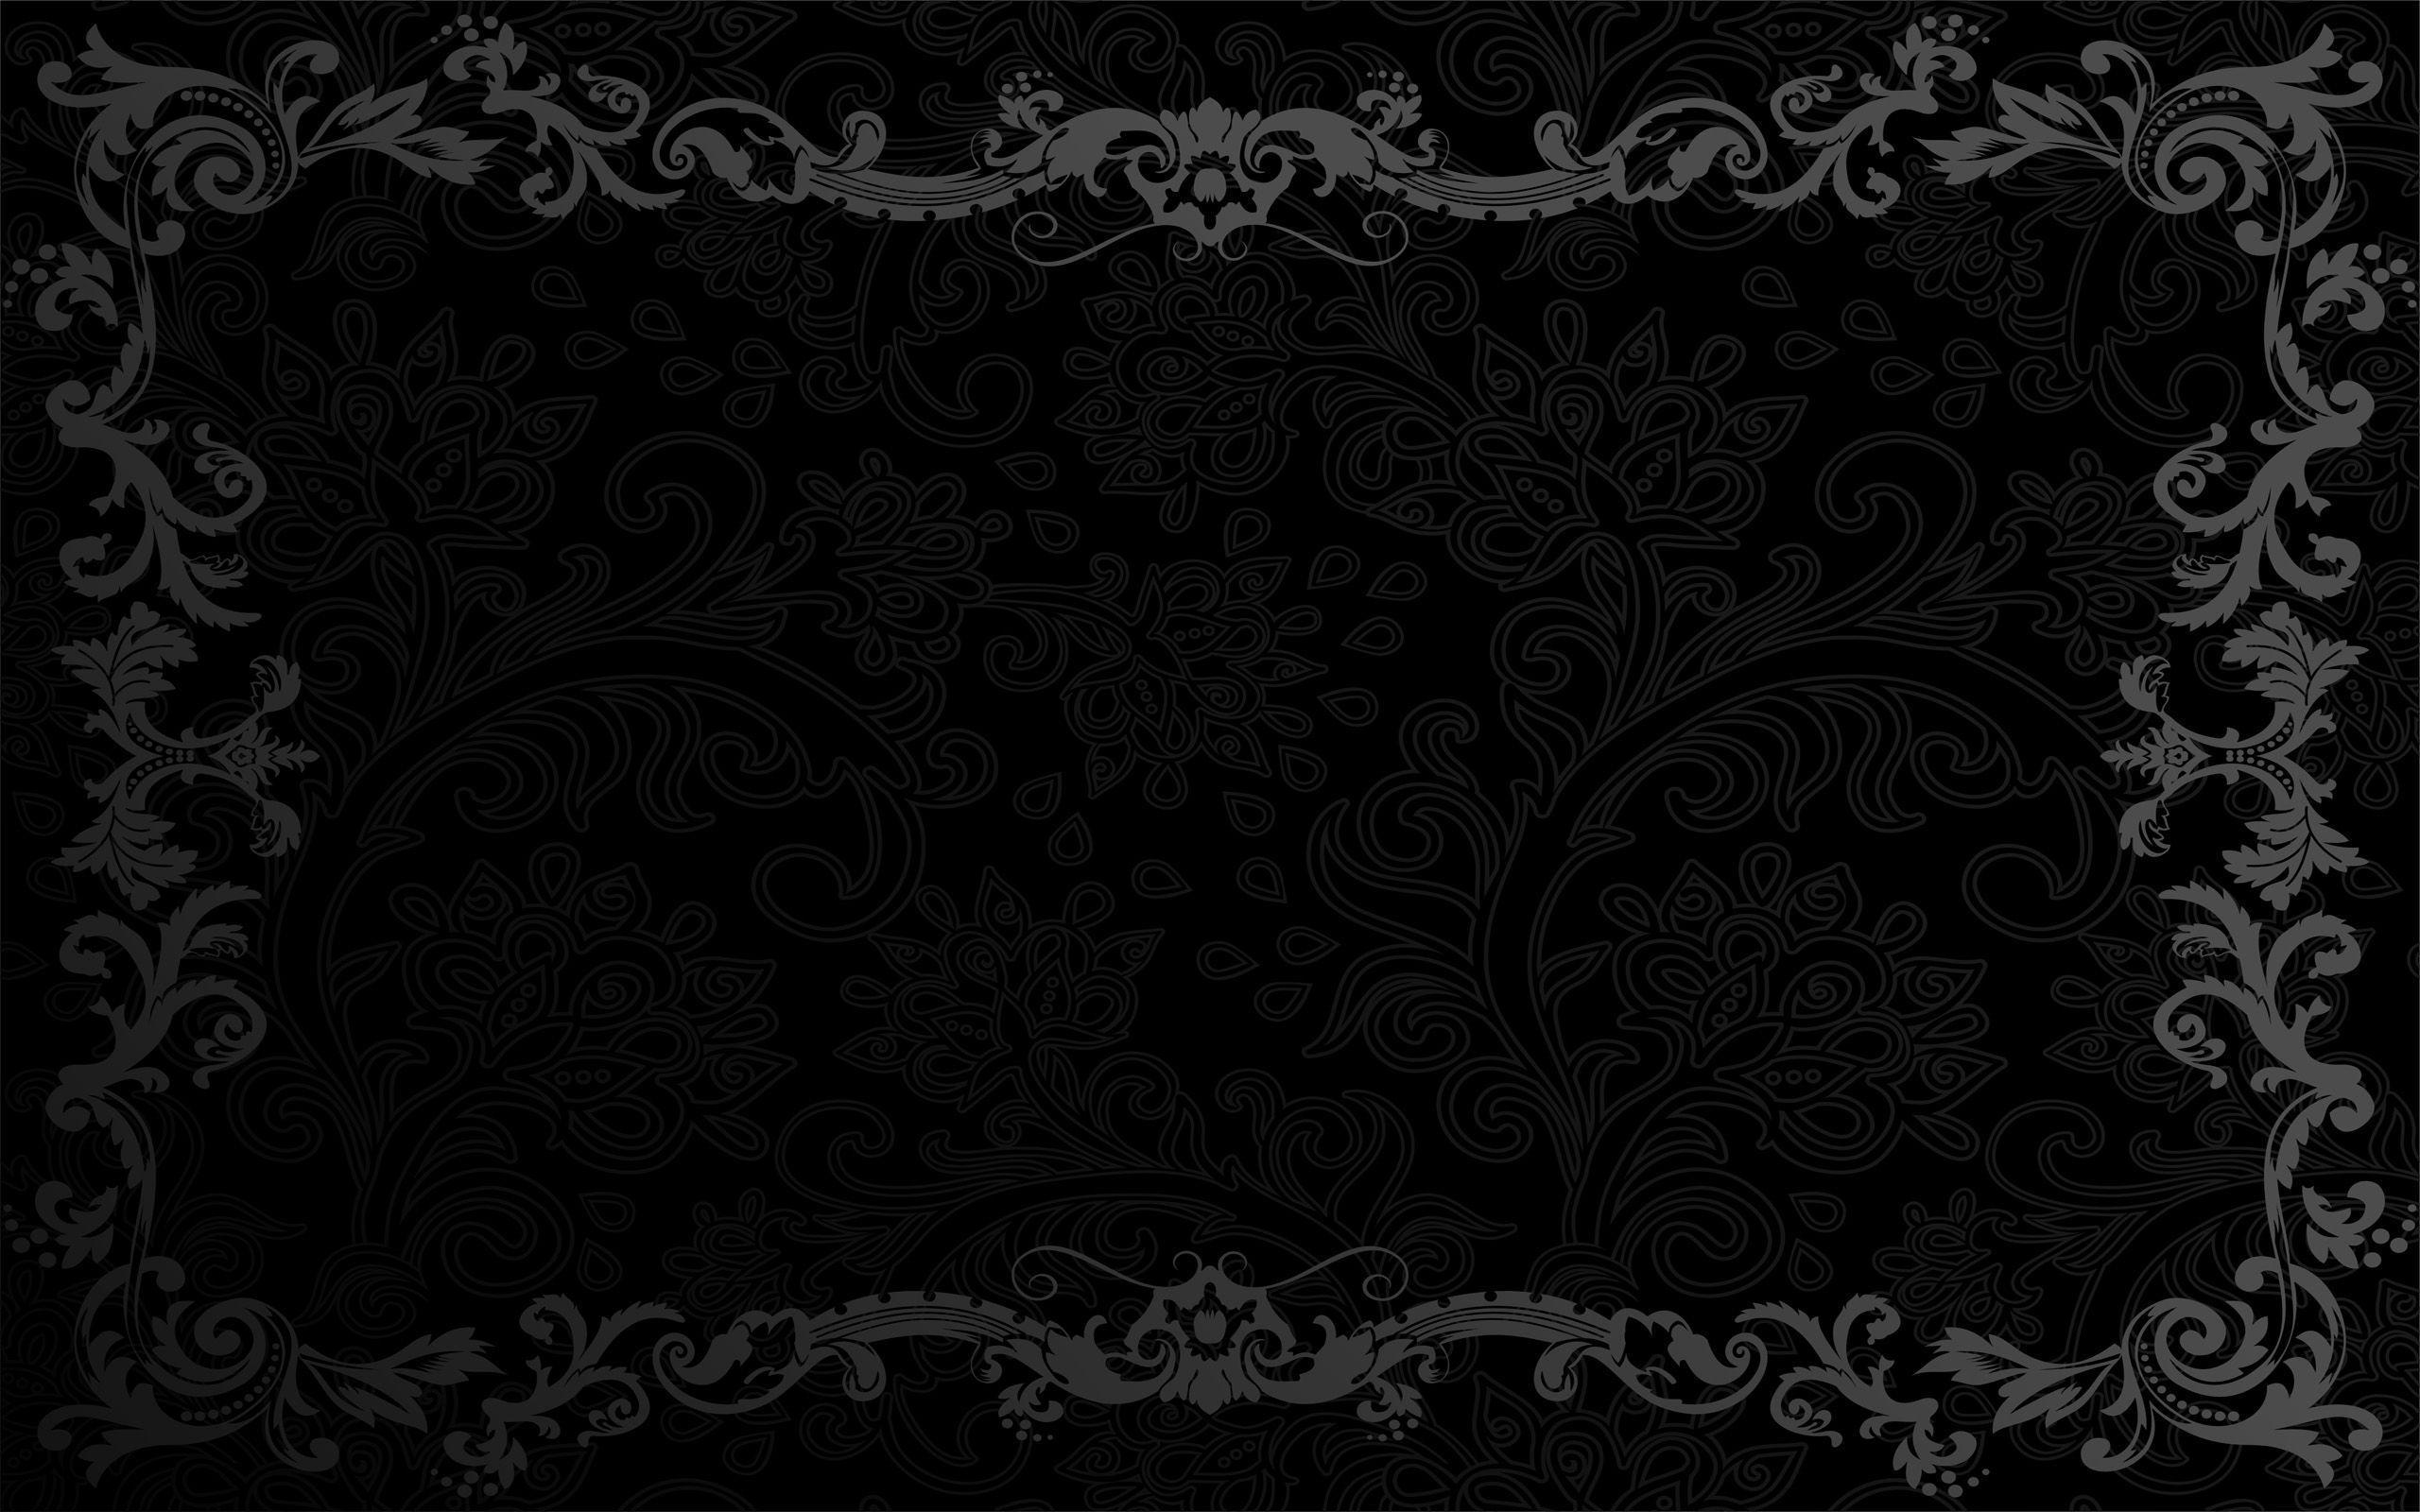 Black Abstract Background HD Background Wallpaper 23 HD Wallpaper